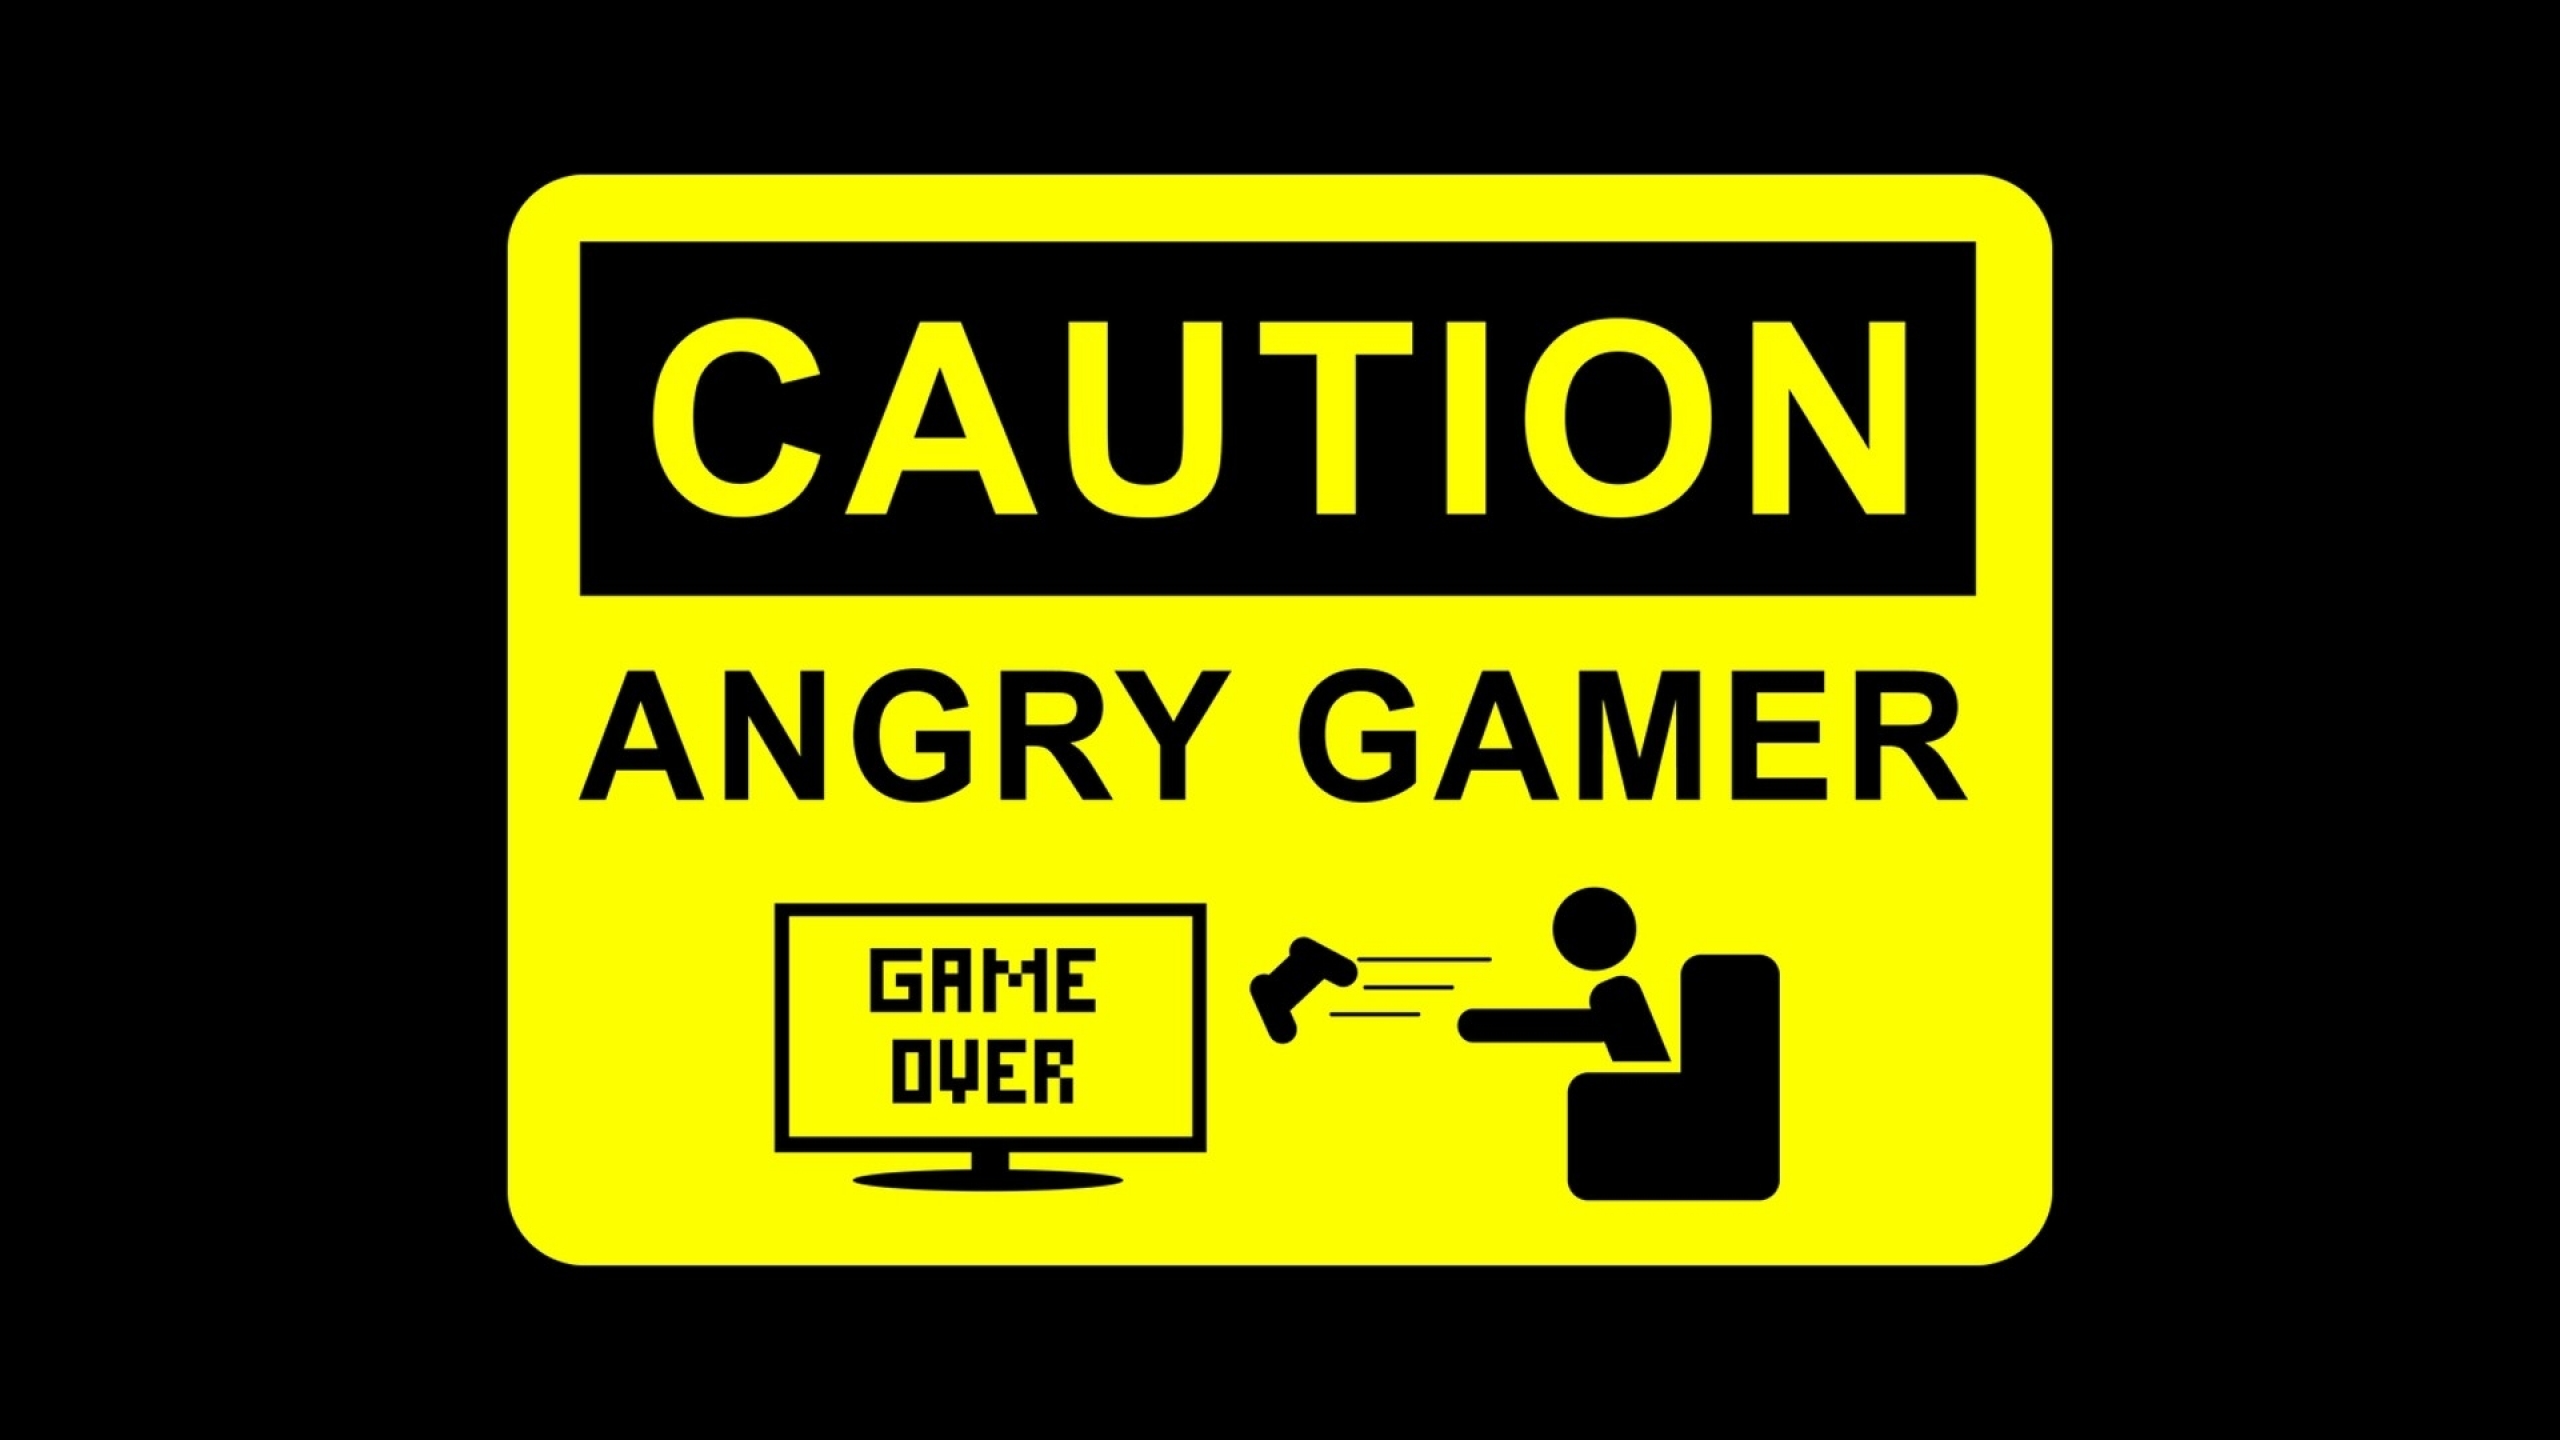 2560x1440 game over angry caution black background gamer 1920x1080 2560x1440